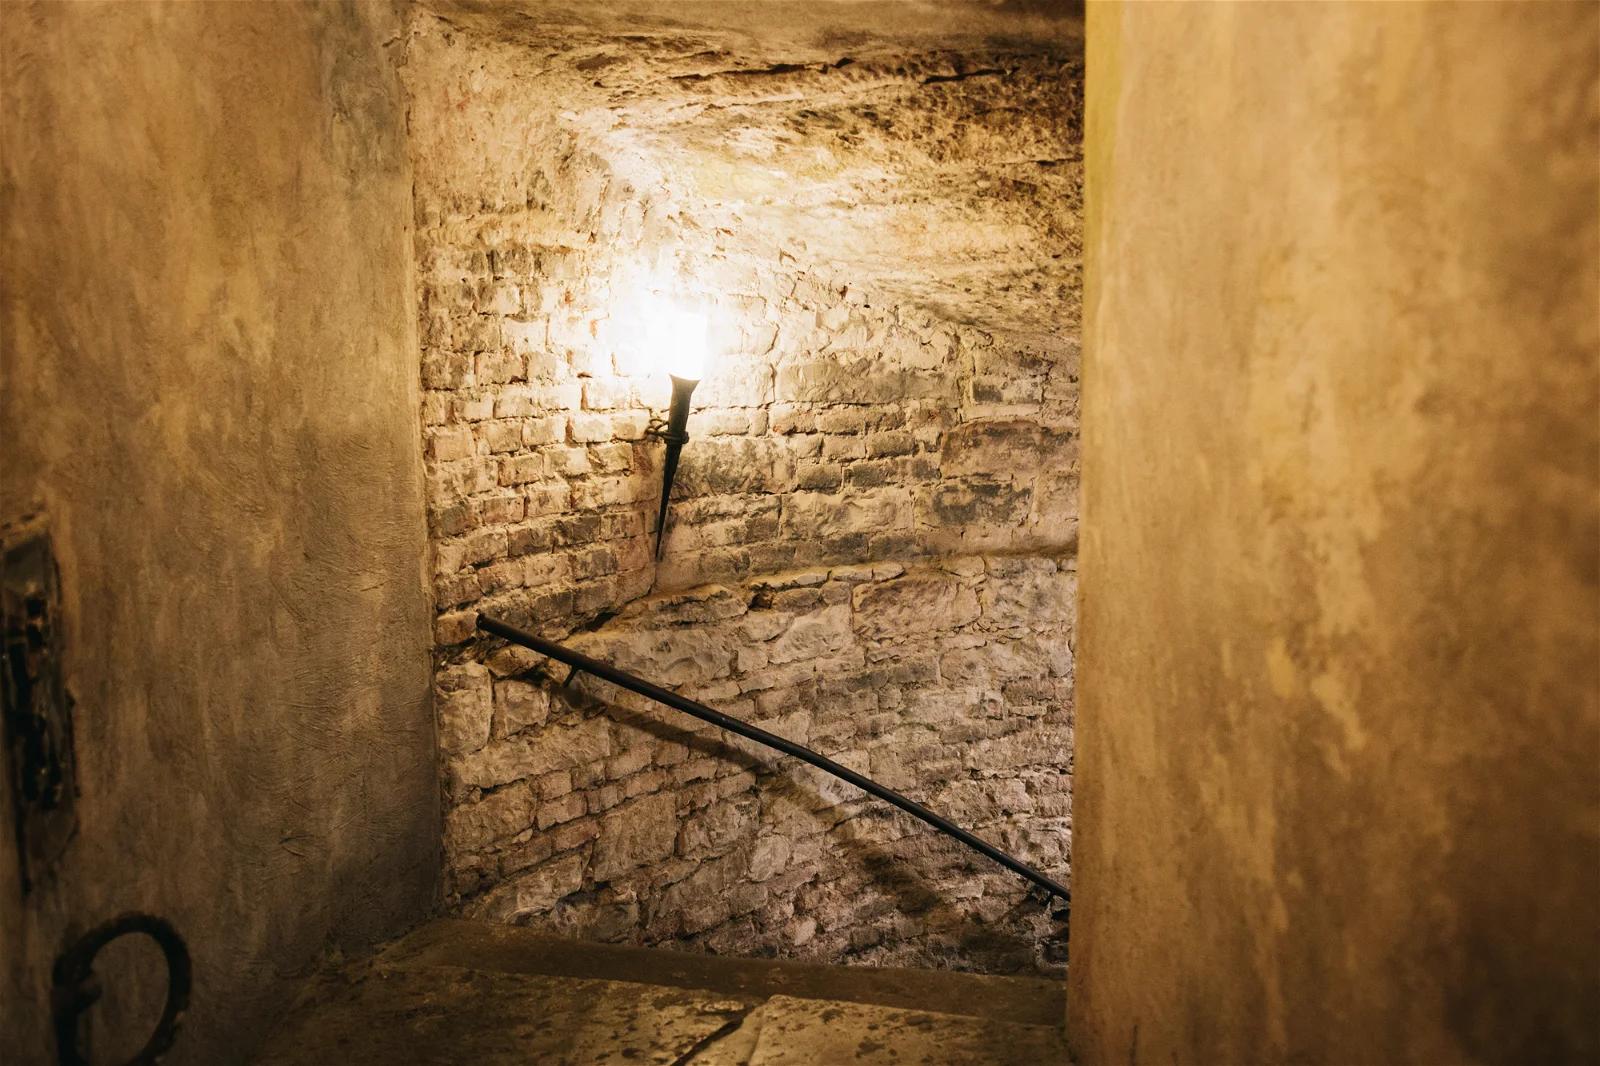 A photograph of a narrow, stone stairwell illuminated by a single wall lamp, evoking the feel of an ancient building or castle.